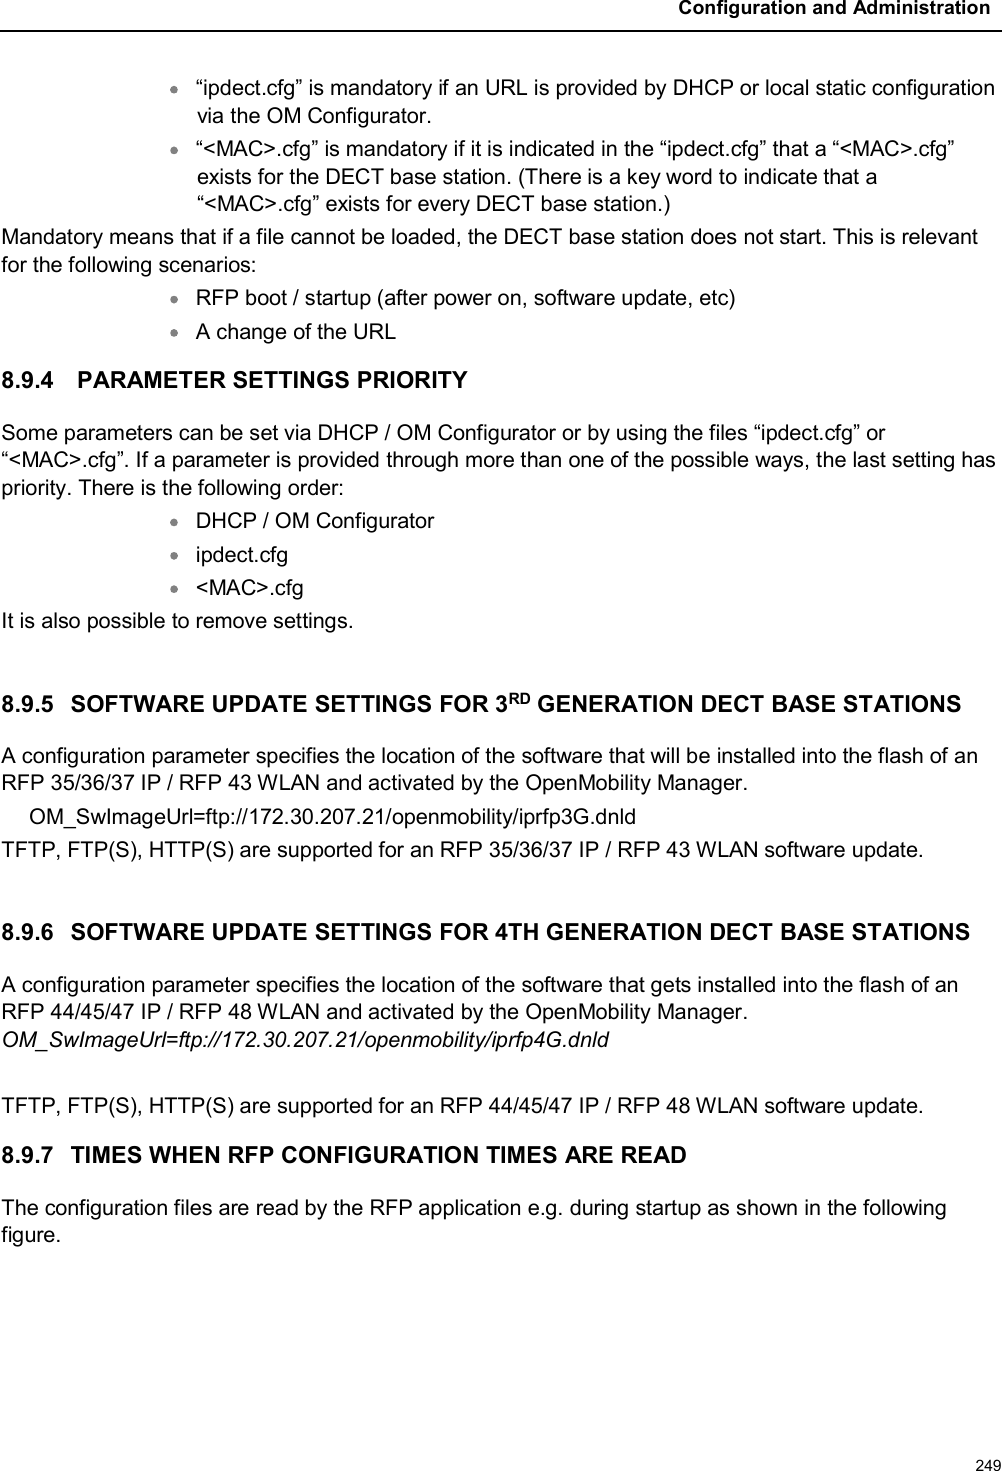 Configuration and Administration249“ipdect.cfg” is mandatory if an URL is provided by DHCP or local static configuration via the OM Configurator.“&lt;MAC&gt;.cfg” is mandatory if it is indicated in the “ipdect.cfg” that a “&lt;MAC&gt;.cfg” exists for the DECT base station. (There is a key word to indicate that a “&lt;MAC&gt;.cfg” exists for every DECT base station.)Mandatory means that if a file cannot be loaded, the DECT base station does not start. This is relevant for the following scenarios:RFP boot / startup (after power on, software update, etc)A change of the URL8.9.4 PARAMETER SETTINGS PRIORITYSome parameters can be set via DHCP / OM Configurator or by using the files “ipdect.cfg” or “&lt;MAC&gt;.cfg”. If a parameter is provided through more than one of the possible ways, the last setting has priority. There is the following order:DHCP / OM Configuratoripdect.cfg&lt;MAC&gt;.cfgIt is also possible to remove settings.8.9.5 SOFTWARE UPDATE SETTINGS FOR 3RD GENERATION DECT BASE STATIONSA configuration parameter specifies the location of the software that will be installed into the flash of an RFP 35/36/37 IP / RFP 43 WLAN and activated by the OpenMobility Manager.OM_SwImageUrl=ftp://172.30.207.21/openmobility/iprfp3G.dnldTFTP, FTP(S), HTTP(S) are supported for an RFP 35/36/37 IP / RFP 43 WLAN software update.8.9.6 SOFTWARE UPDATE SETTINGS FOR 4TH GENERATION DECT BASE STATIONS A configuration parameter specifies the location of the software that gets installed into the flash of an RFP 44/45/47 IP / RFP 48 WLAN and activated by the OpenMobility Manager. OM_SwImageUrl=ftp://172.30.207.21/openmobility/iprfp4G.dnldTFTP, FTP(S), HTTP(S) are supported for an RFP 44/45/47 IP / RFP 48 WLAN software update.8.9.7 TIMES WHEN RFP CONFIGURATION TIMES ARE READThe configuration files are read by the RFP application e.g. during startup as shown in the following figure.